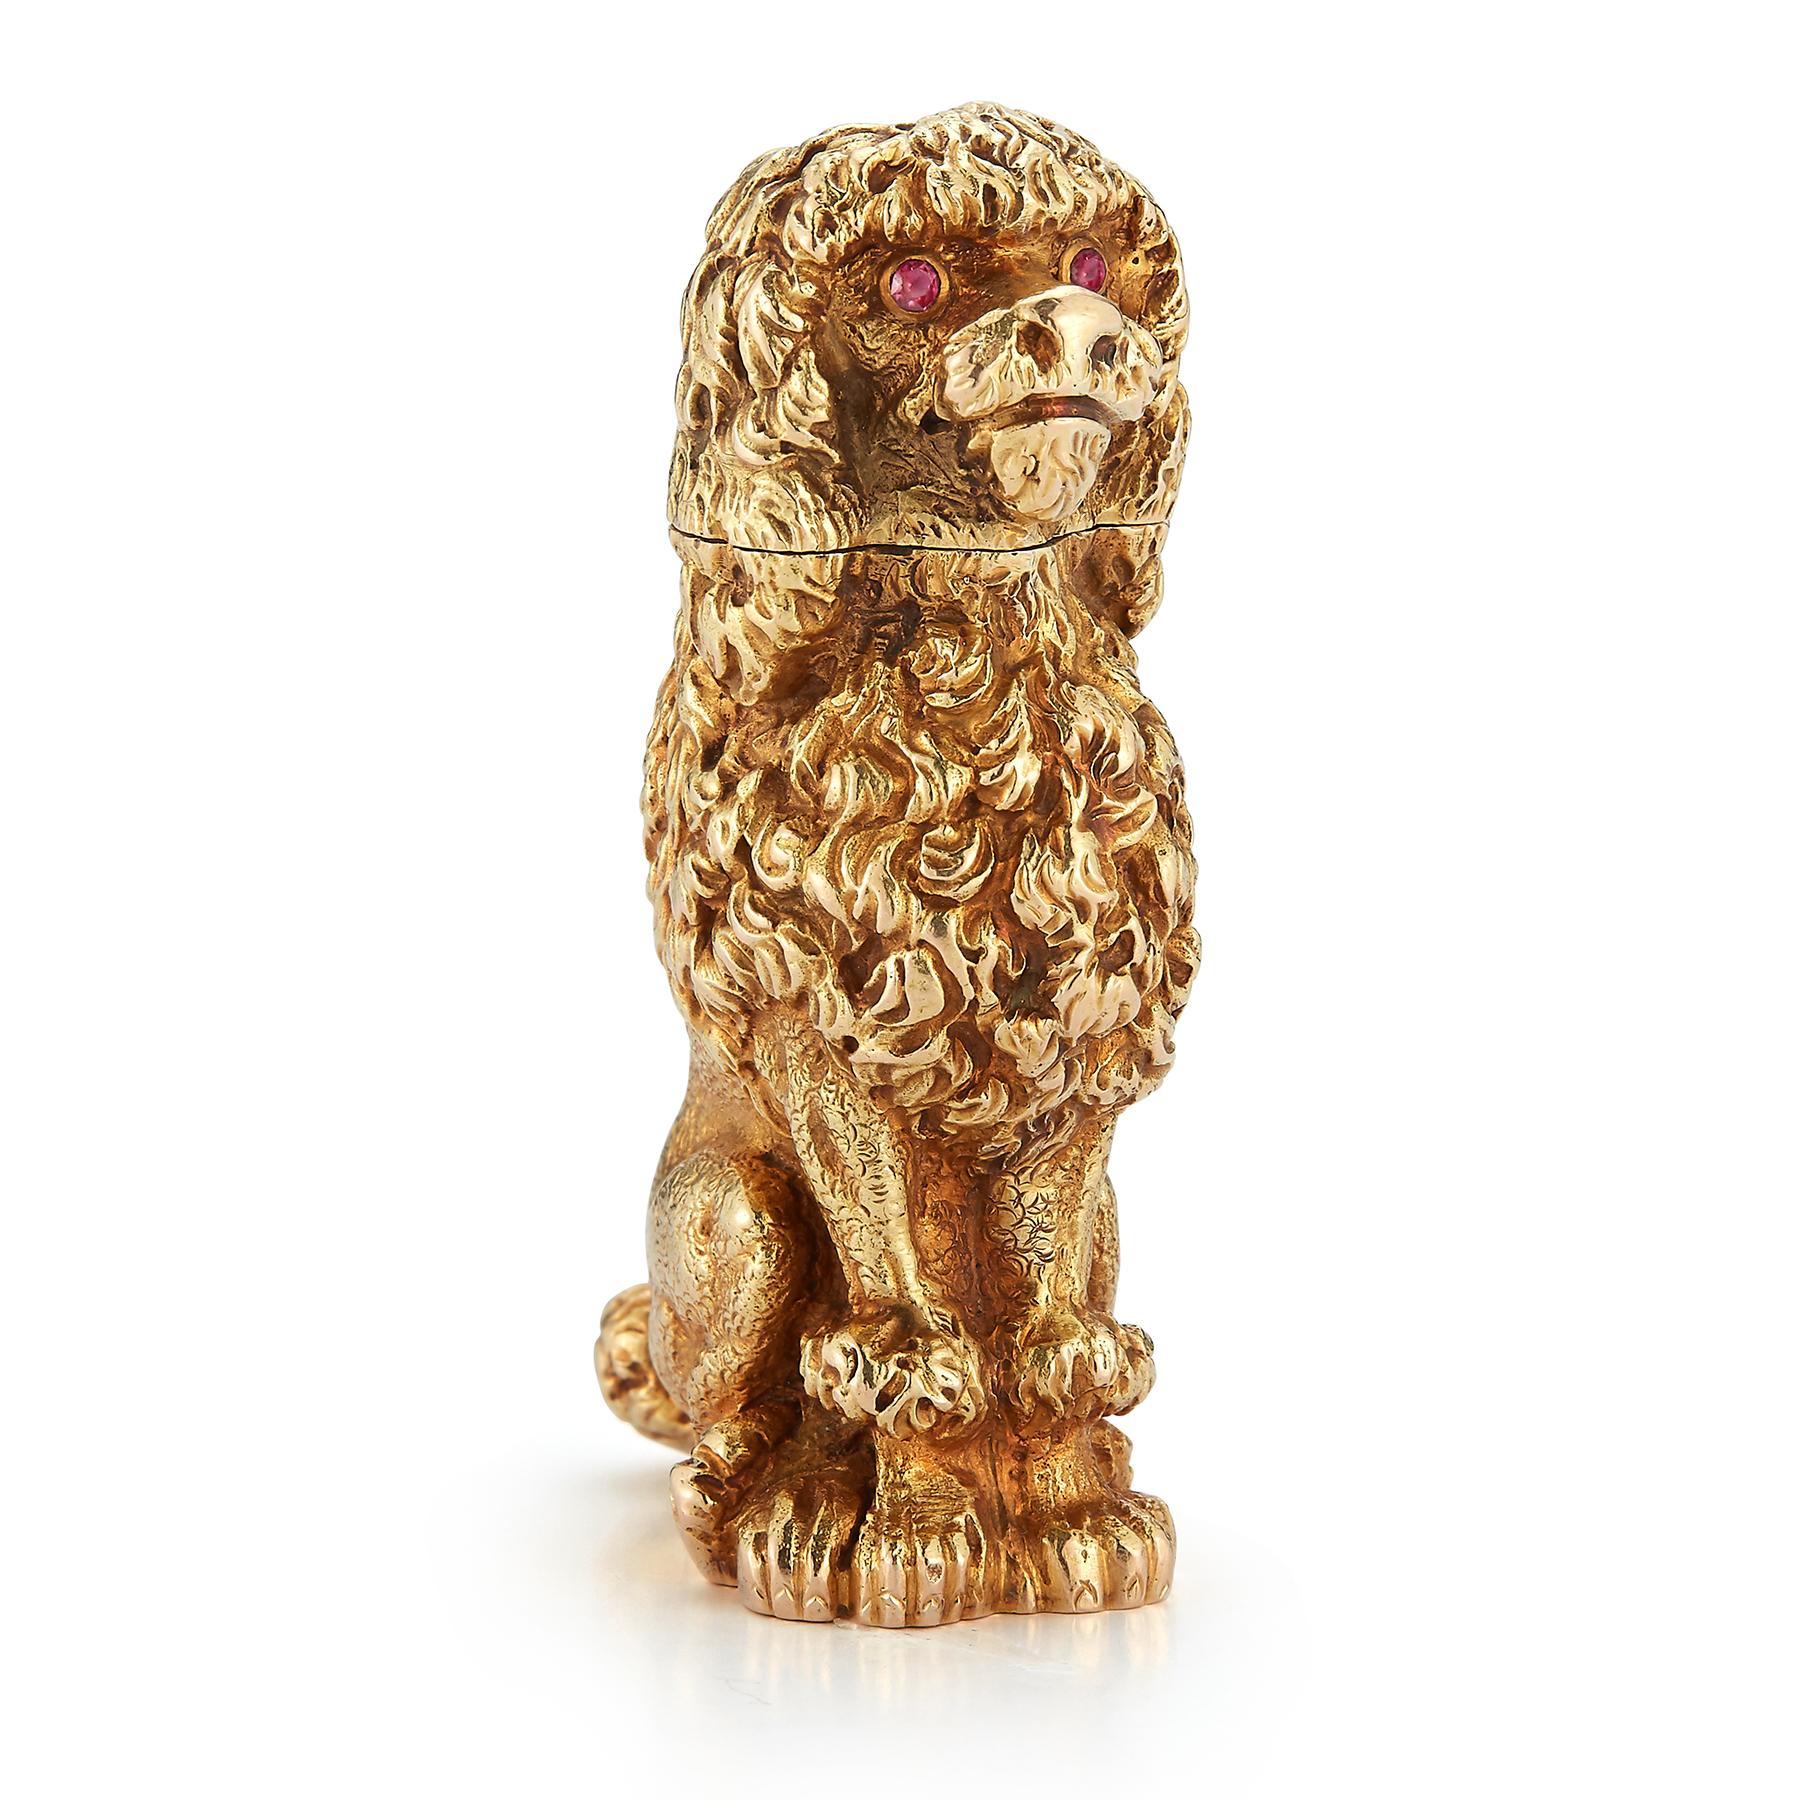 Schlumberger Gold Poodle Lighter , 18k carved gold with ruby eyes .Circa 1950

Measurements: 5.5 x 3.3 x 2.1 cm

Gram Weight: 47.3 grams 

Gold Type:  14k yellow gold

Signed, Schlumberger 